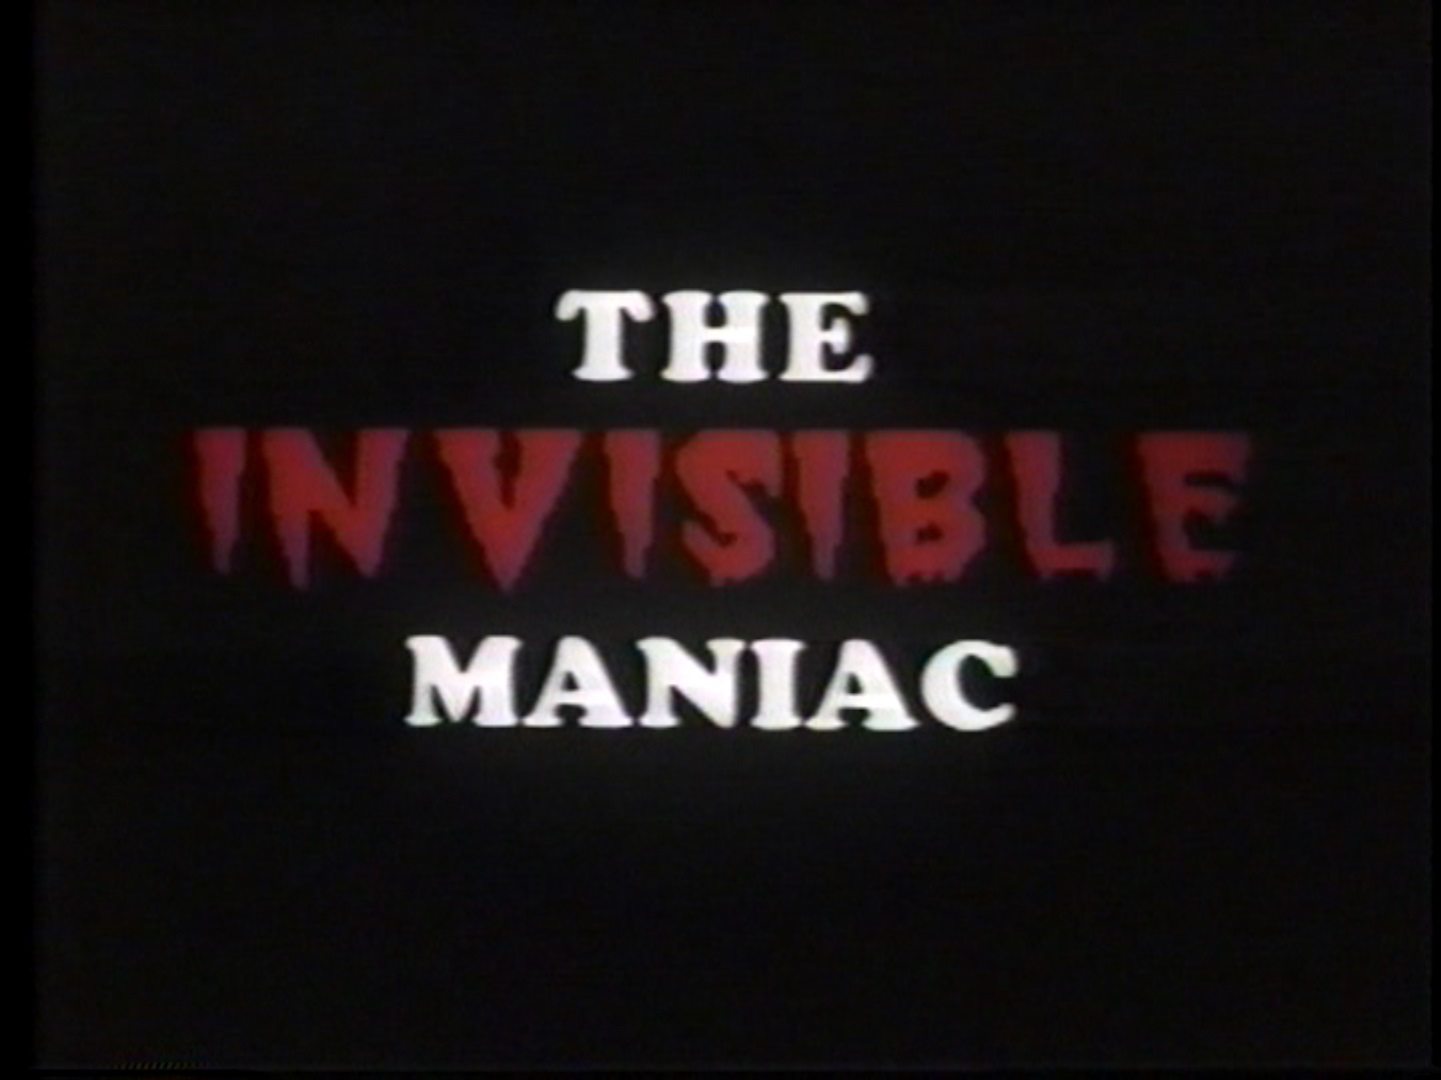 The invisible maniac (1990) .